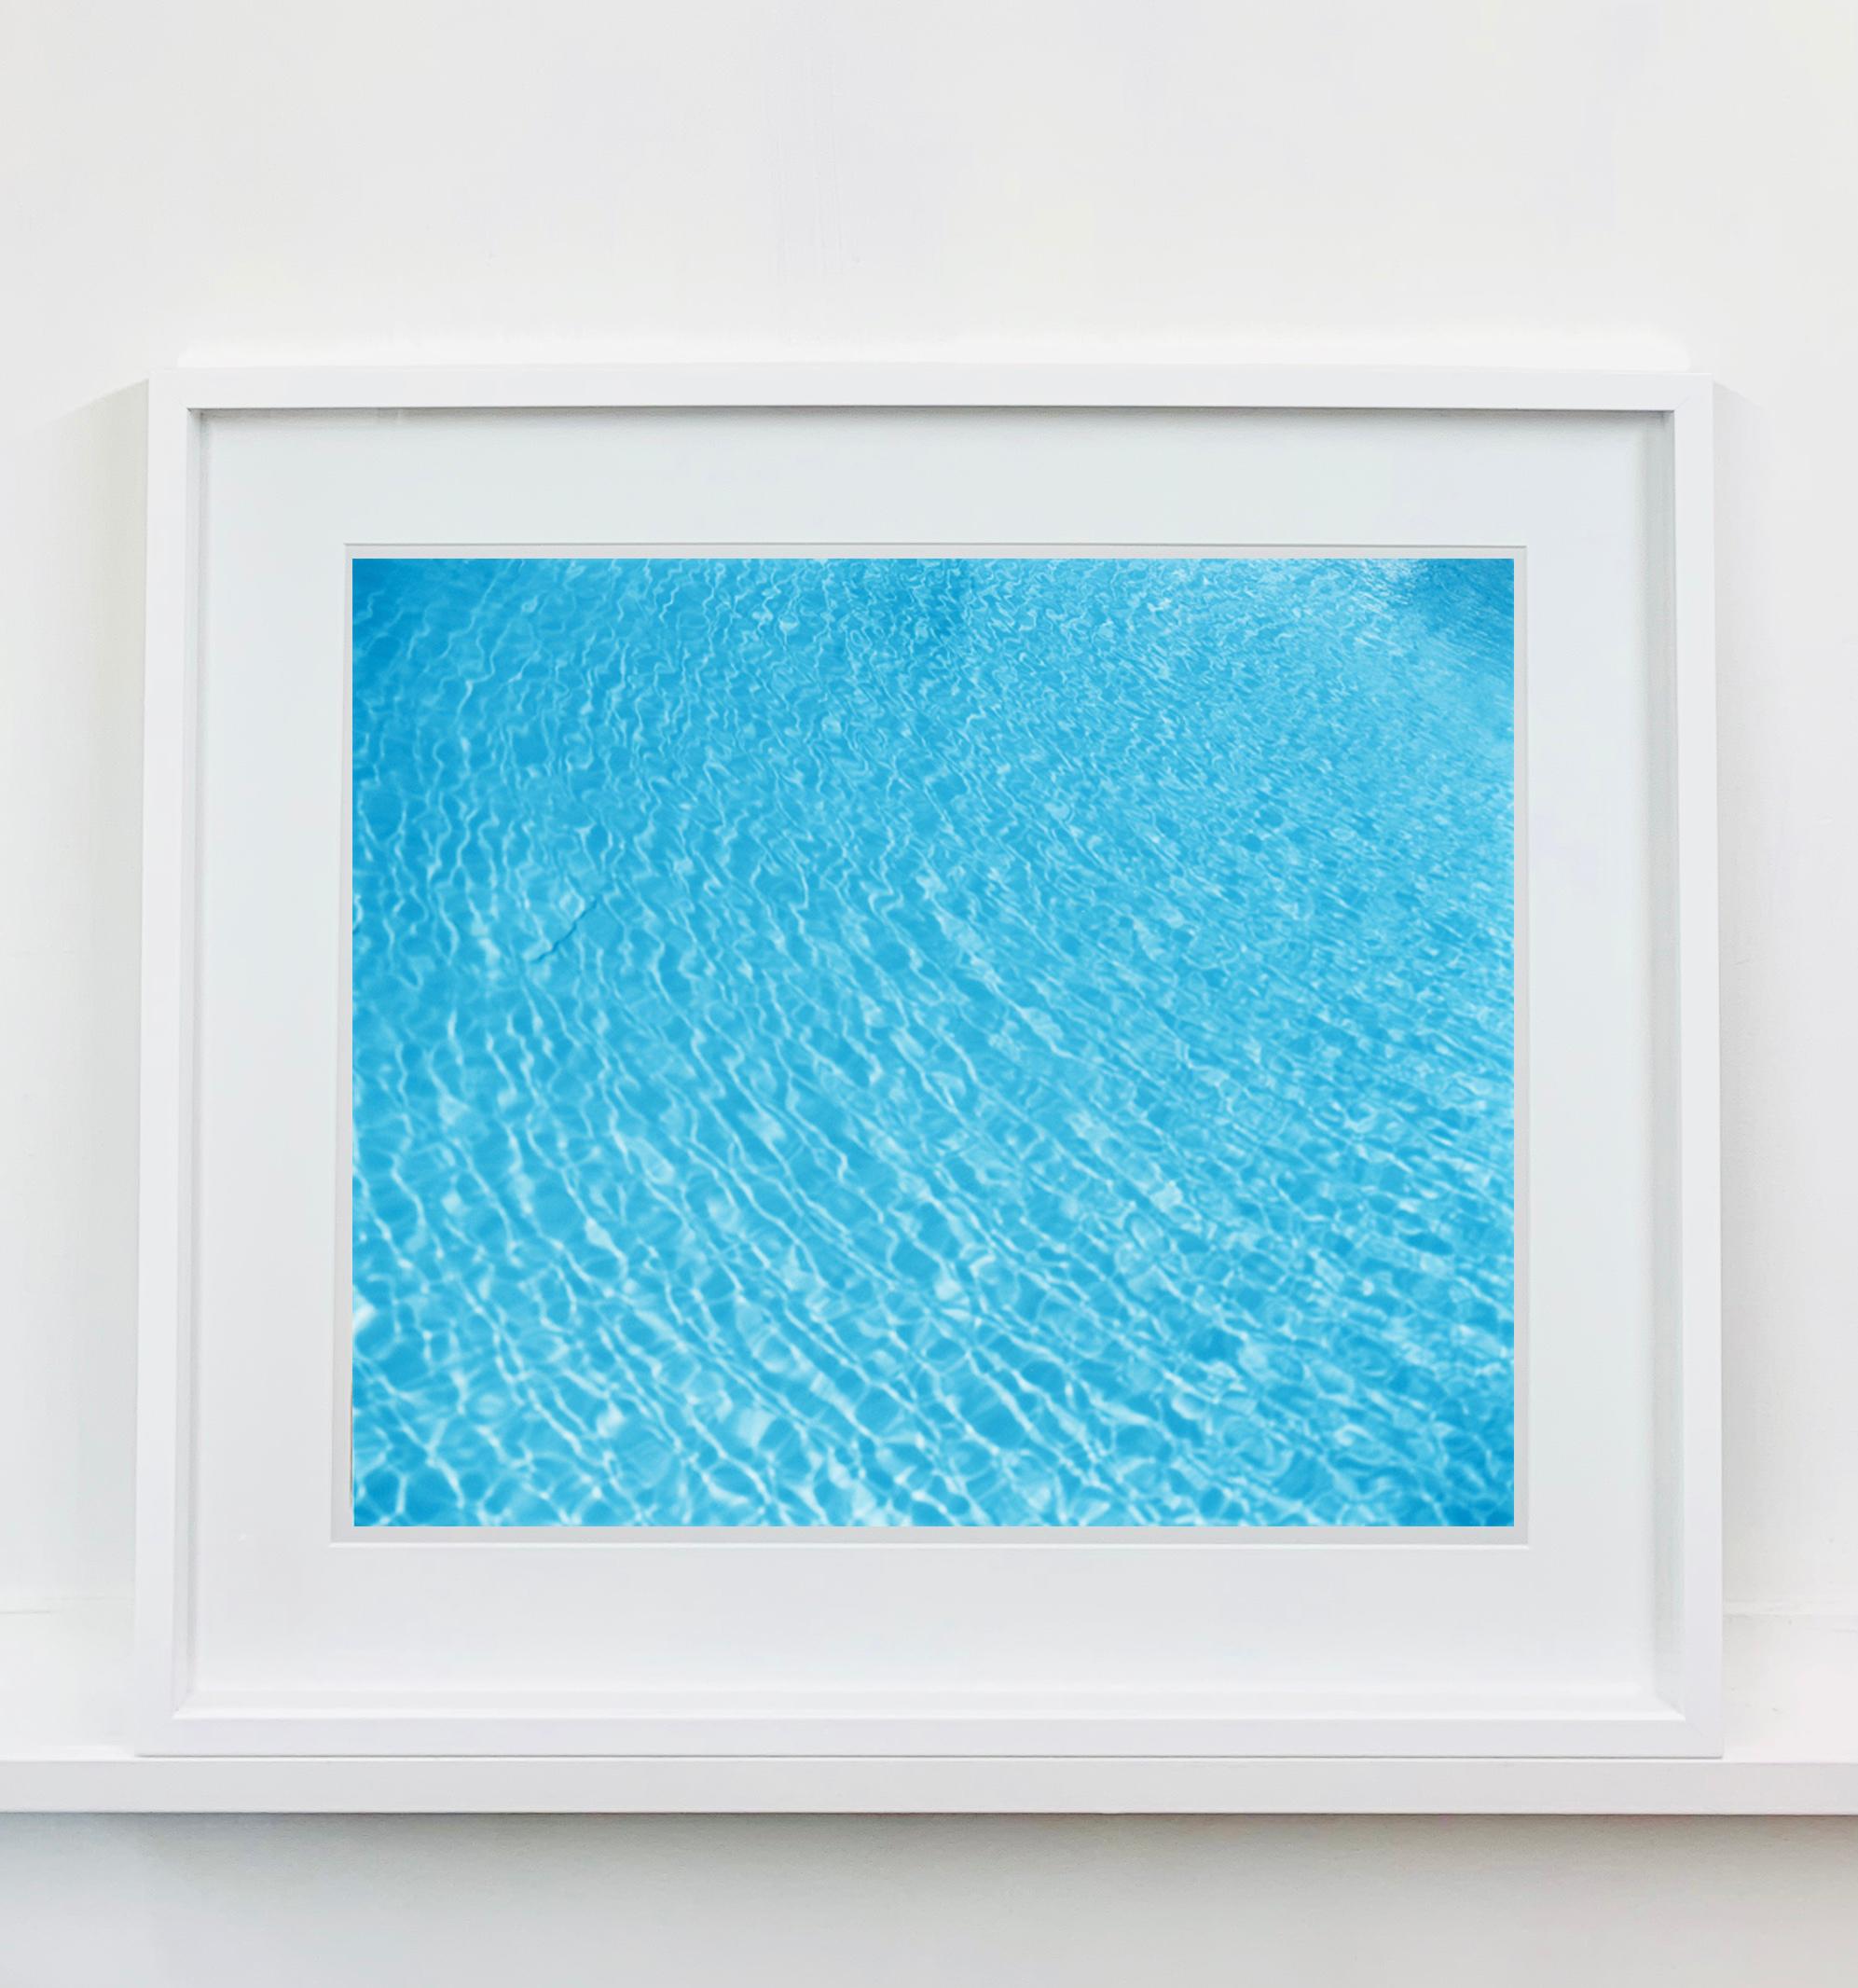 Part of Richard Heeps 'Dream in Colour' Series, with some seriously cool colours and pool vibes.

This artwork is a limited edition of 25, gloss photographic print. Accompanied by a signed and numbered certificate of authenticity. Free Shipping.
The